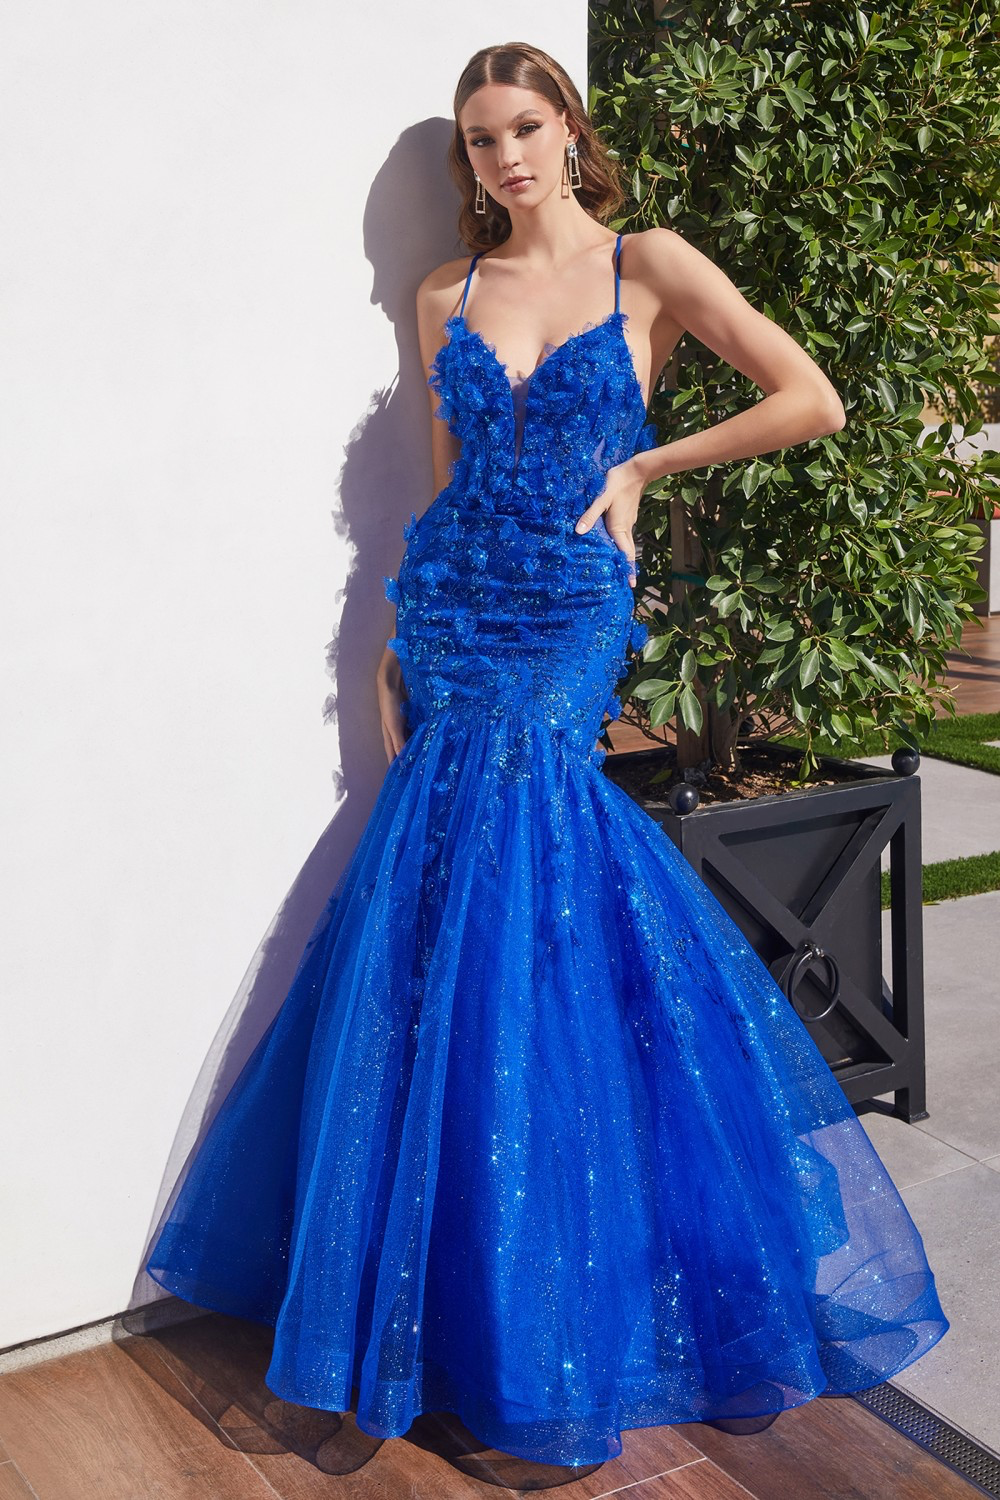 Share more than 148 blue mermaid gown